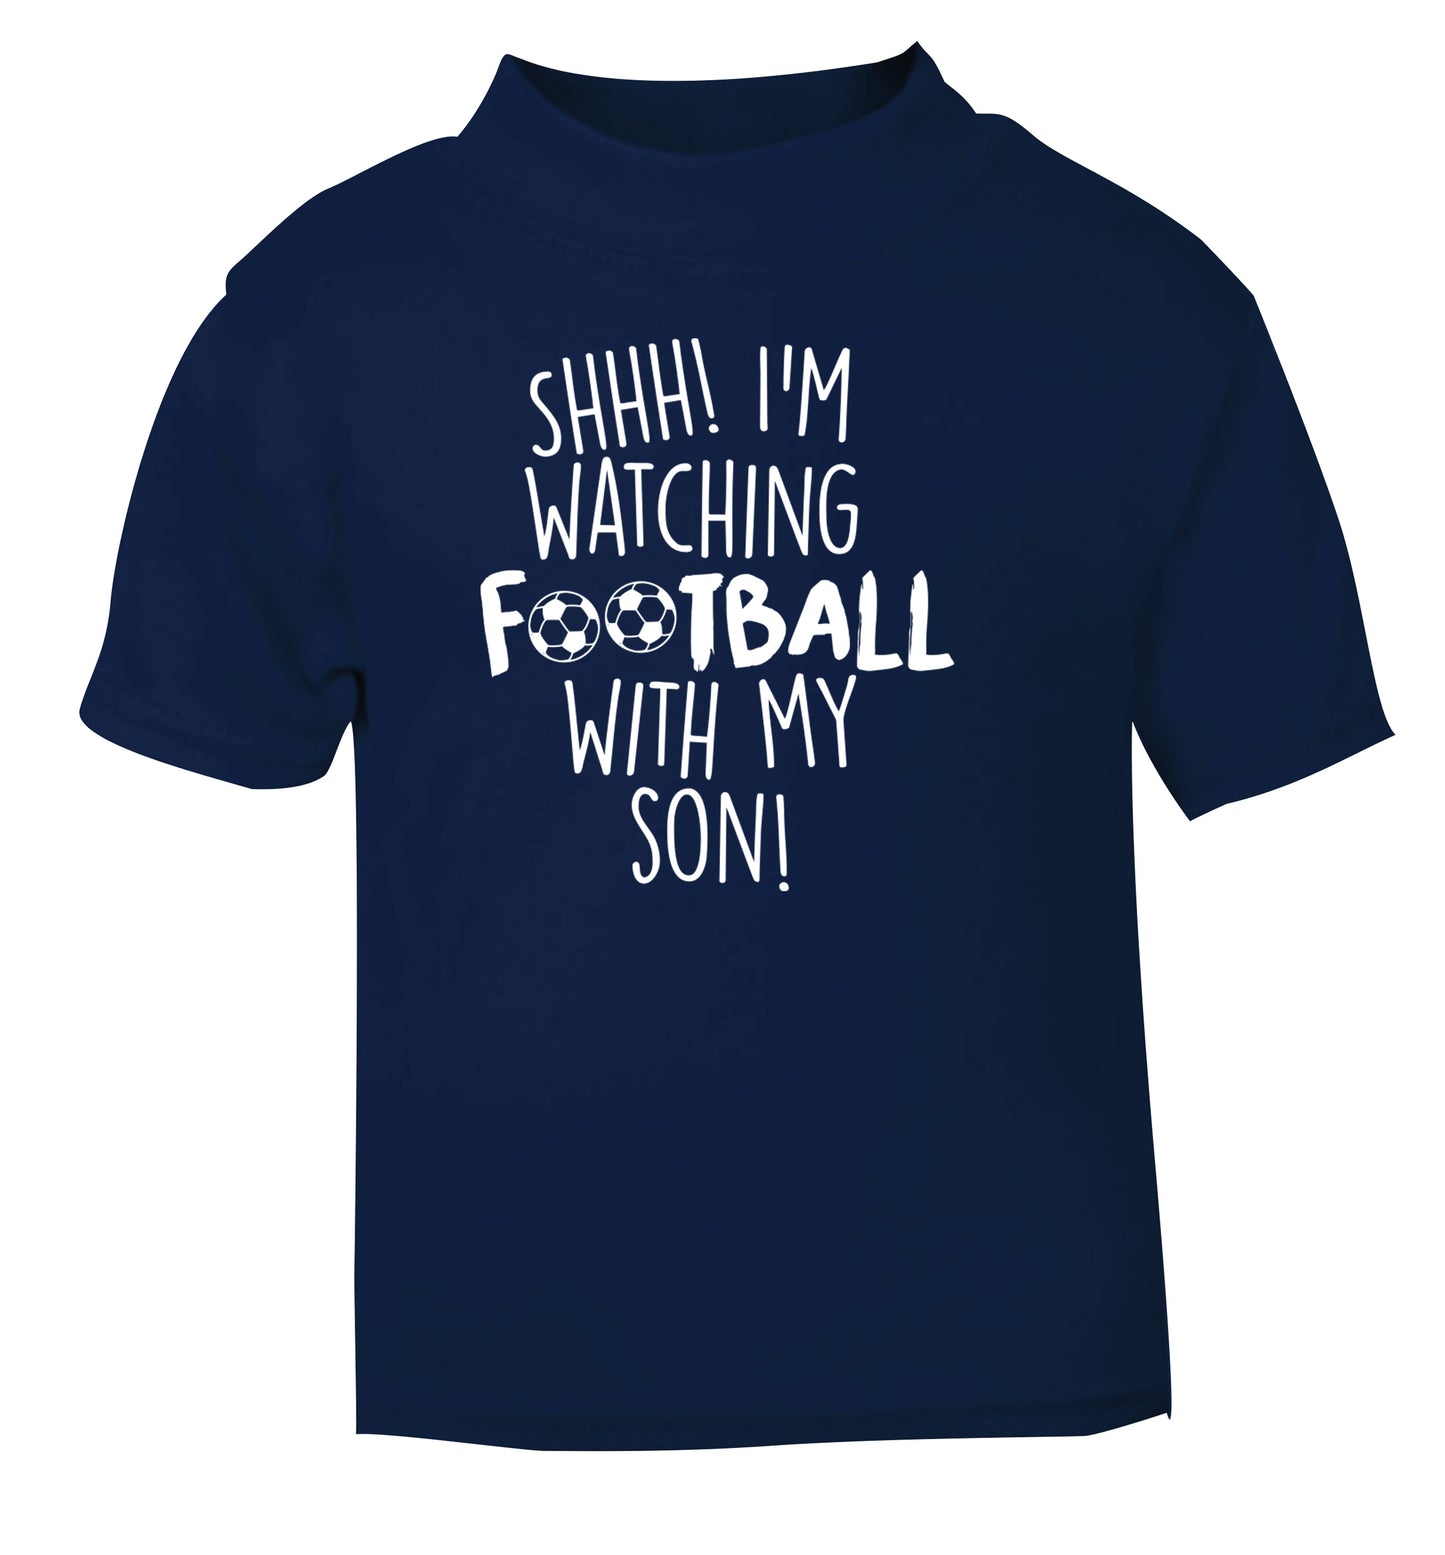 Shhh I'm watching football with my son navy Baby Toddler Tshirt 2 Years